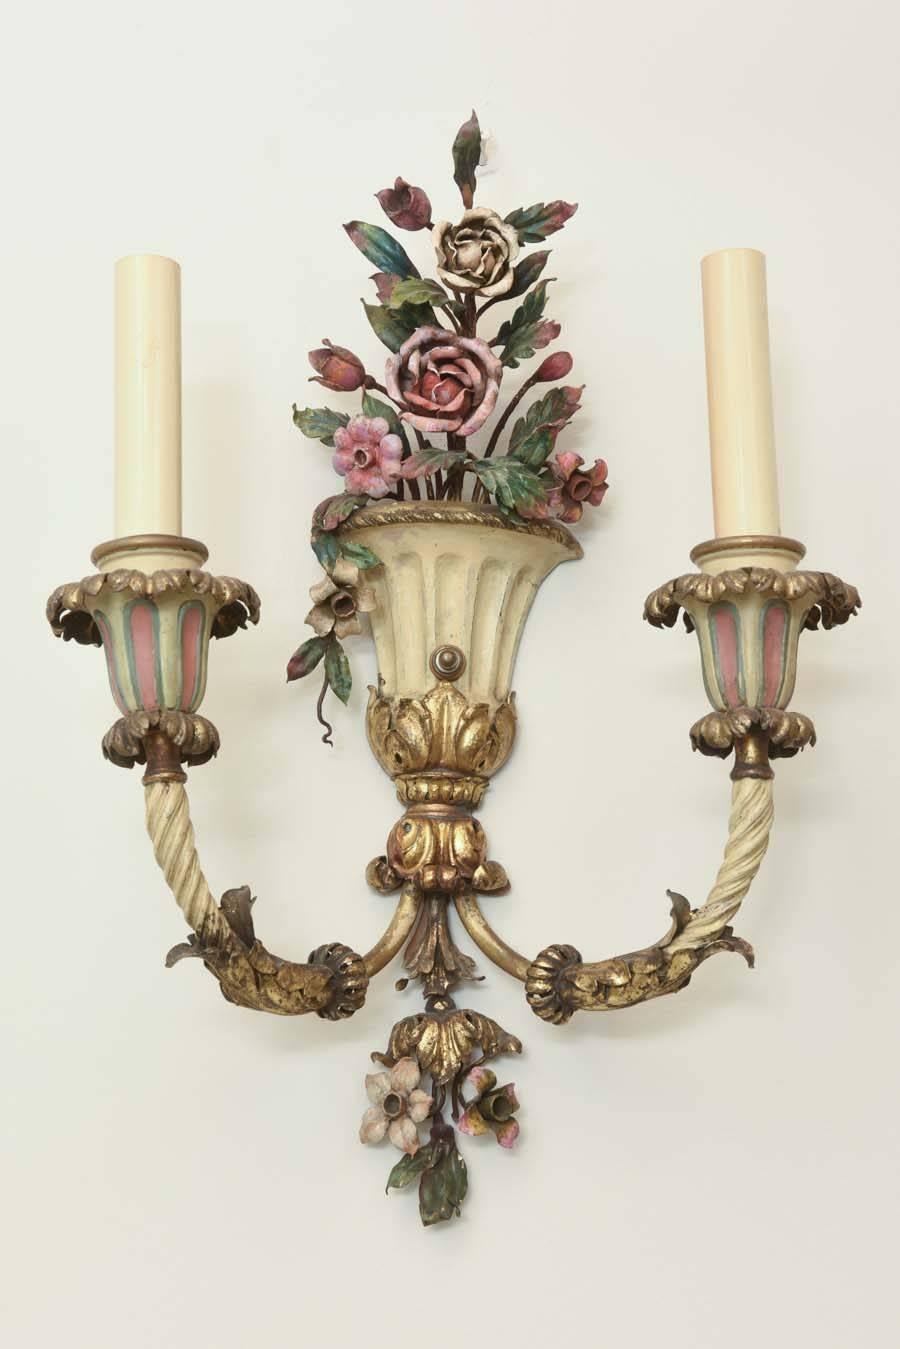 Fine pair of sconces, polychromed decoration over repousse bronze dore, each backplate shaped as a flower-filled urn, having double-candle, C-scroll arms, with acanthus details.  

Stock ID: D8529